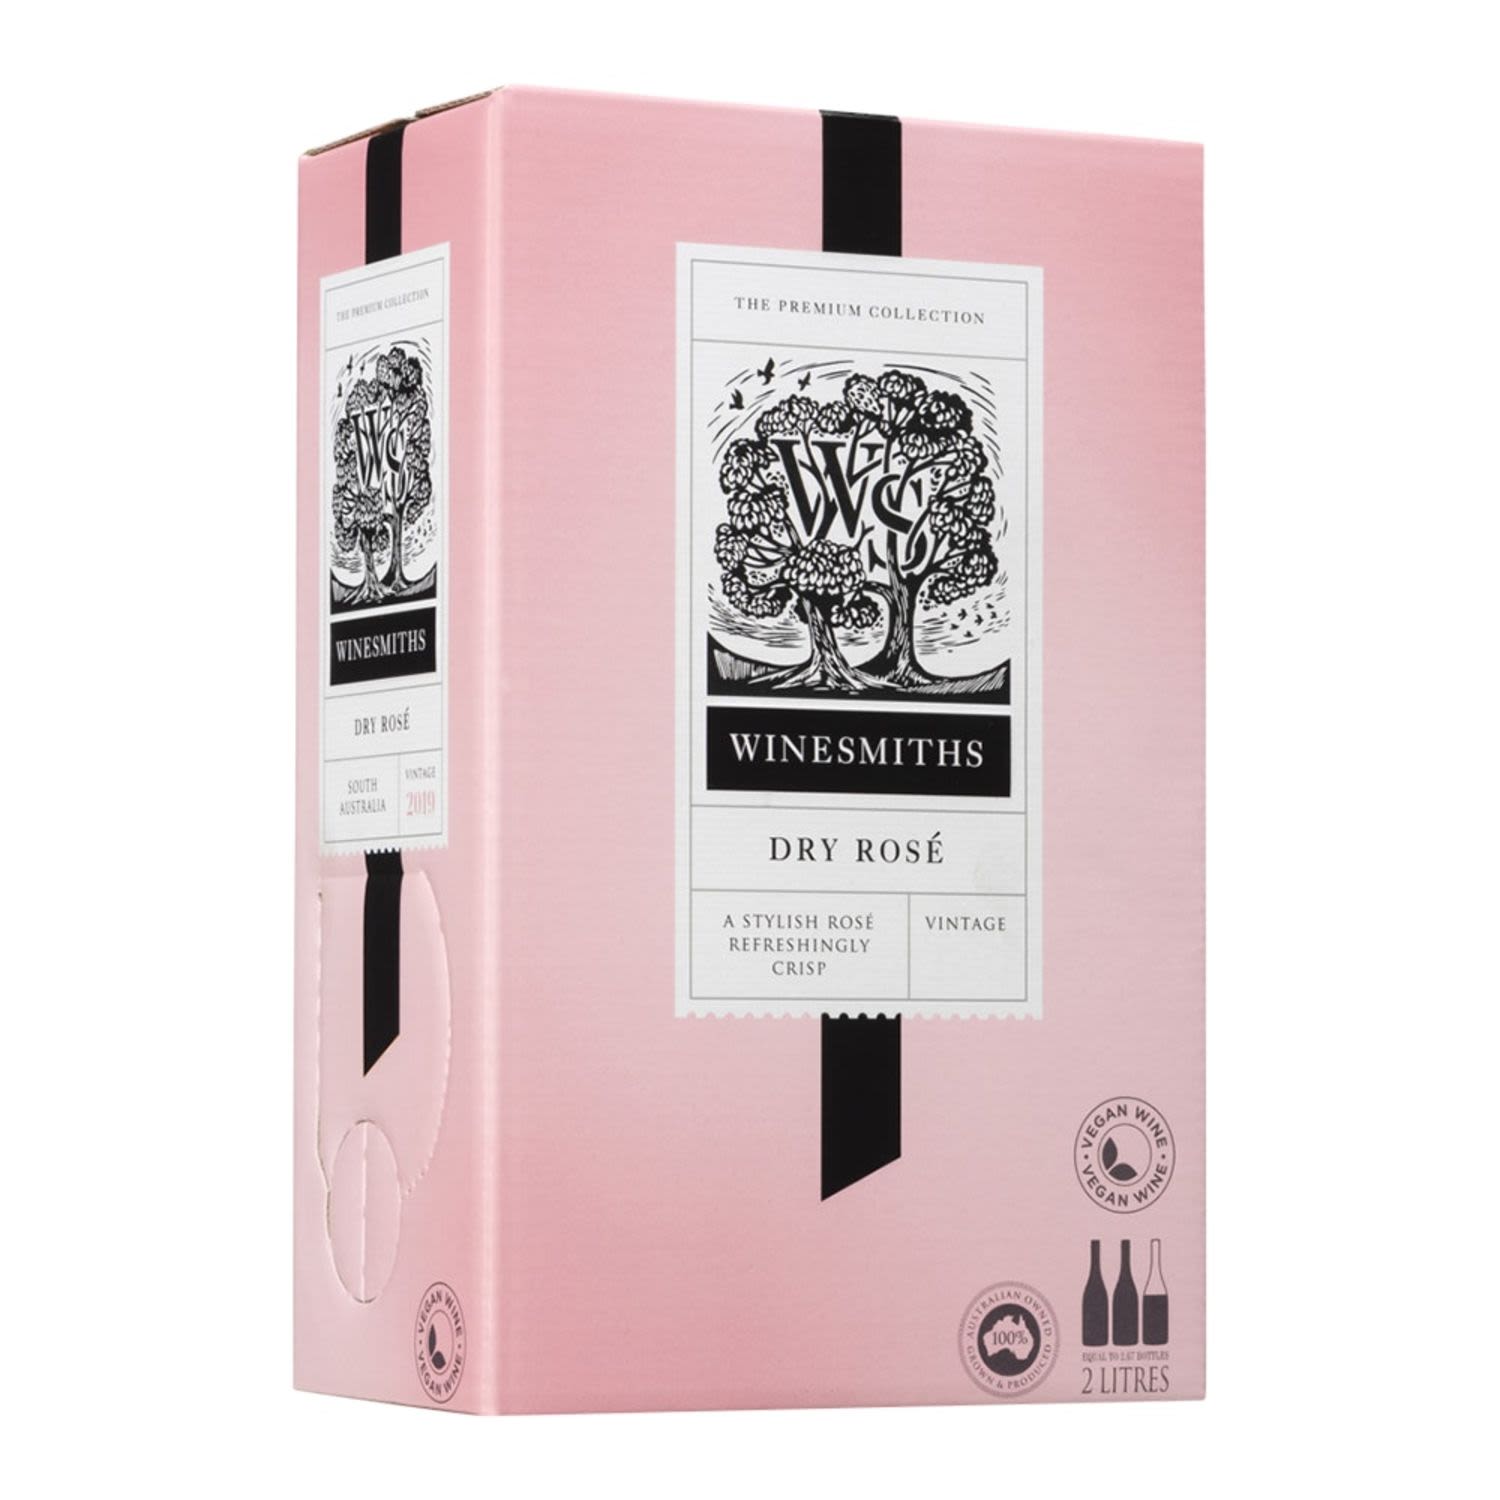 Winesmiths Dry Rose Cask 2L